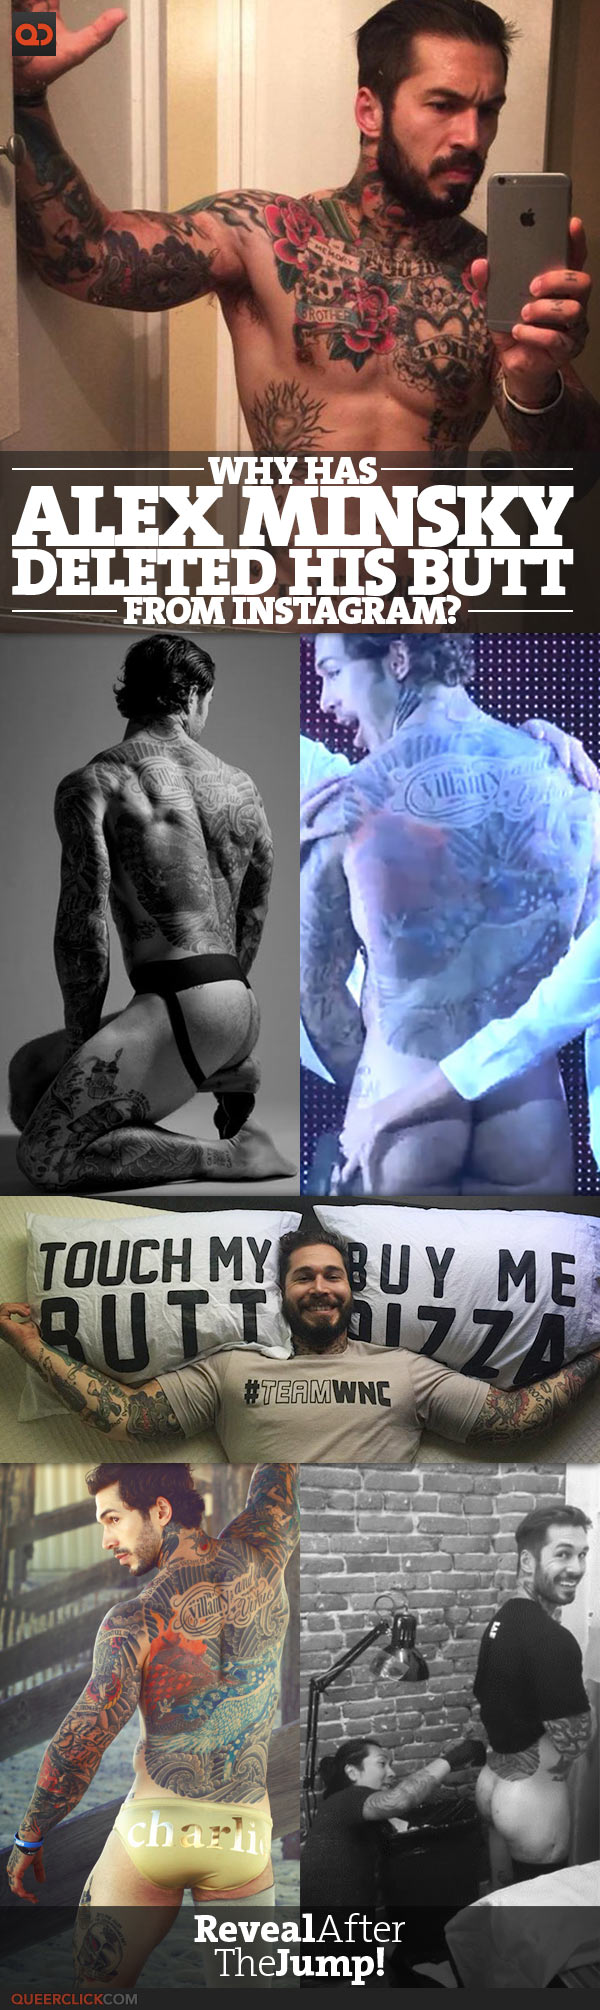 qc-why_did_alex_minsky_deleted_his_butt_from_instagram-teaser